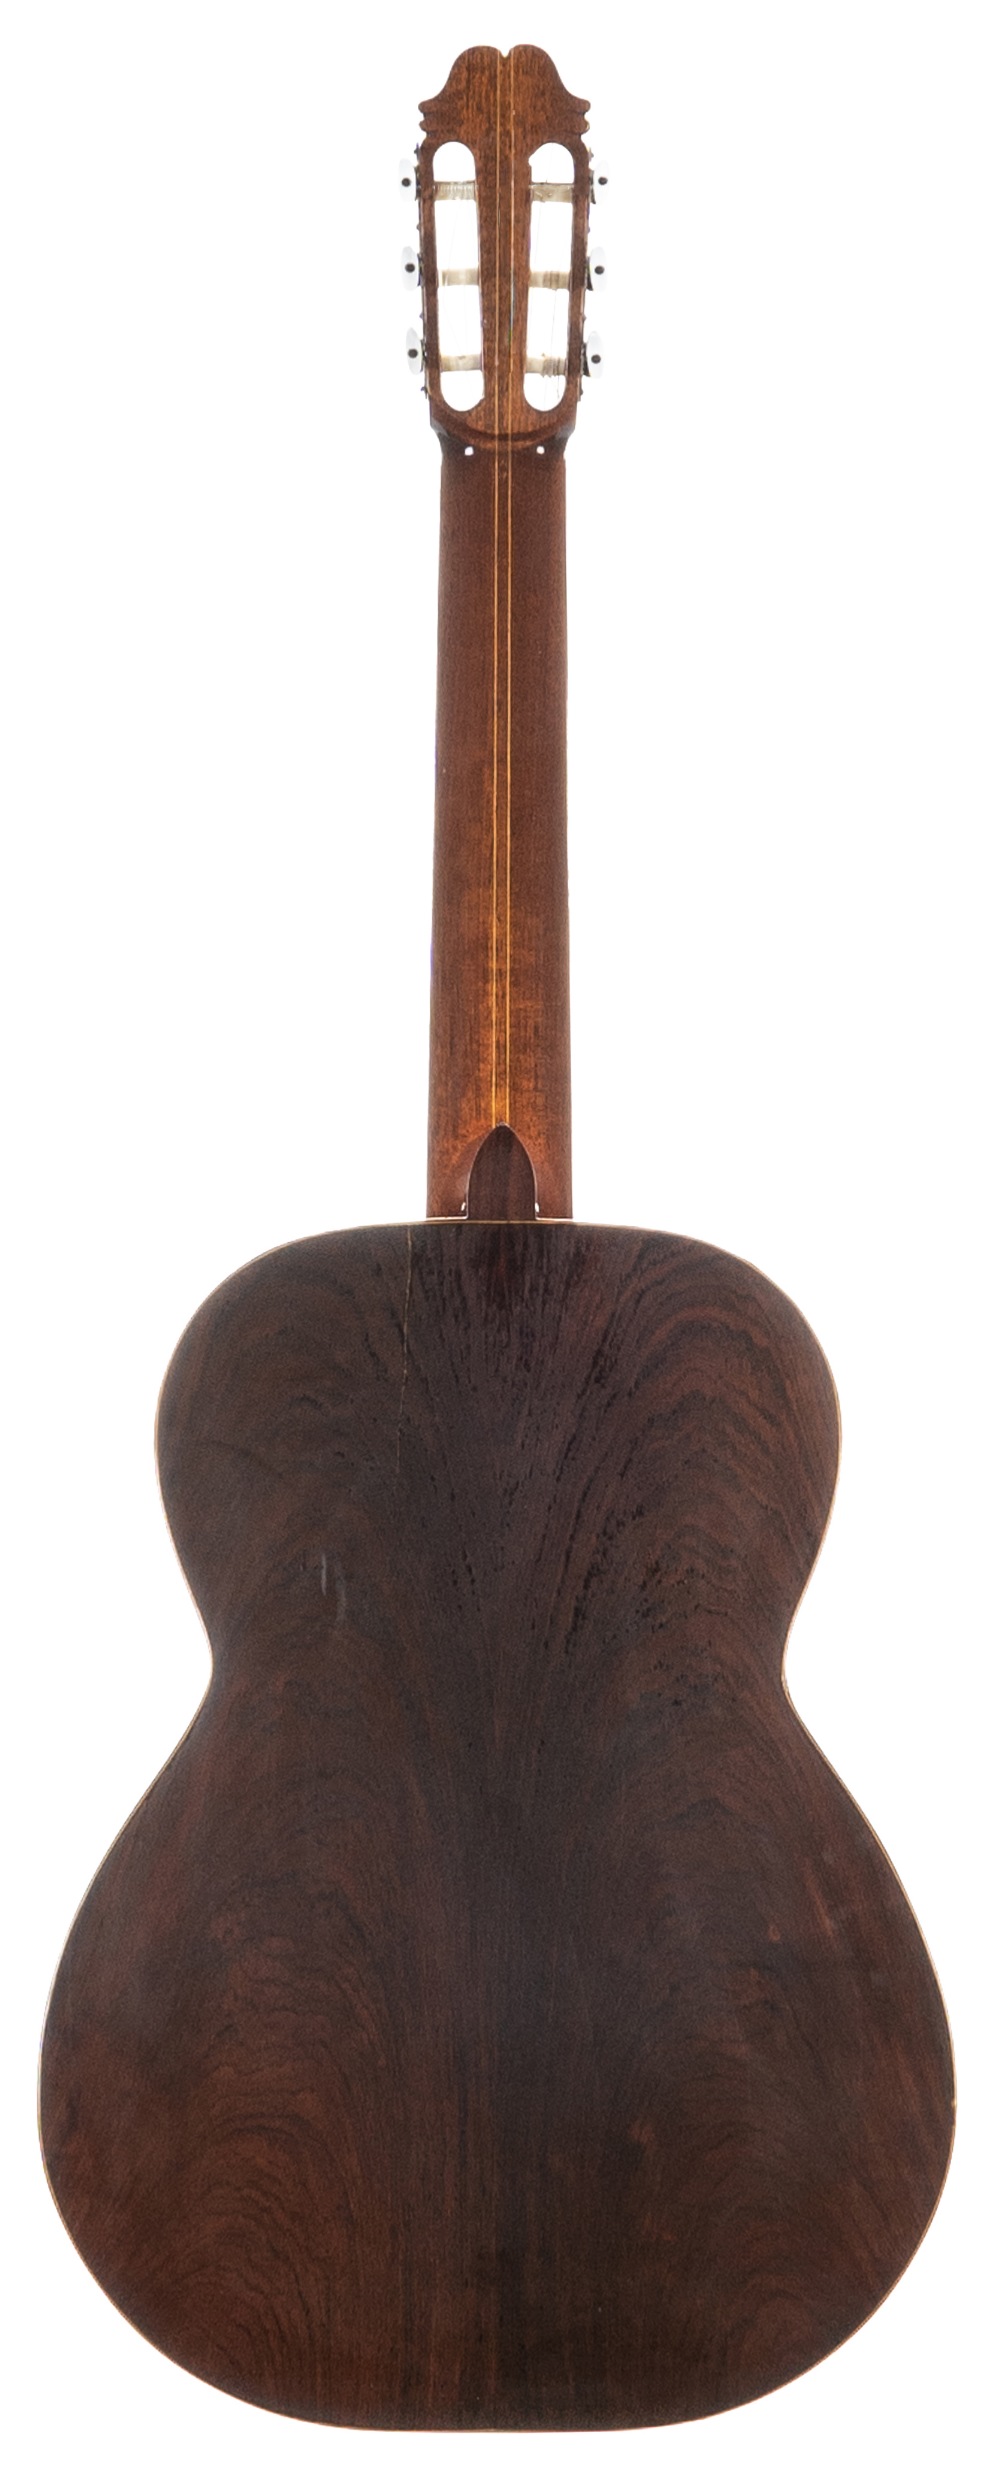 1976 Albert Bayliss classical guitar, made in Kingswinford, England; Back and sides: rosewood, - Image 2 of 2